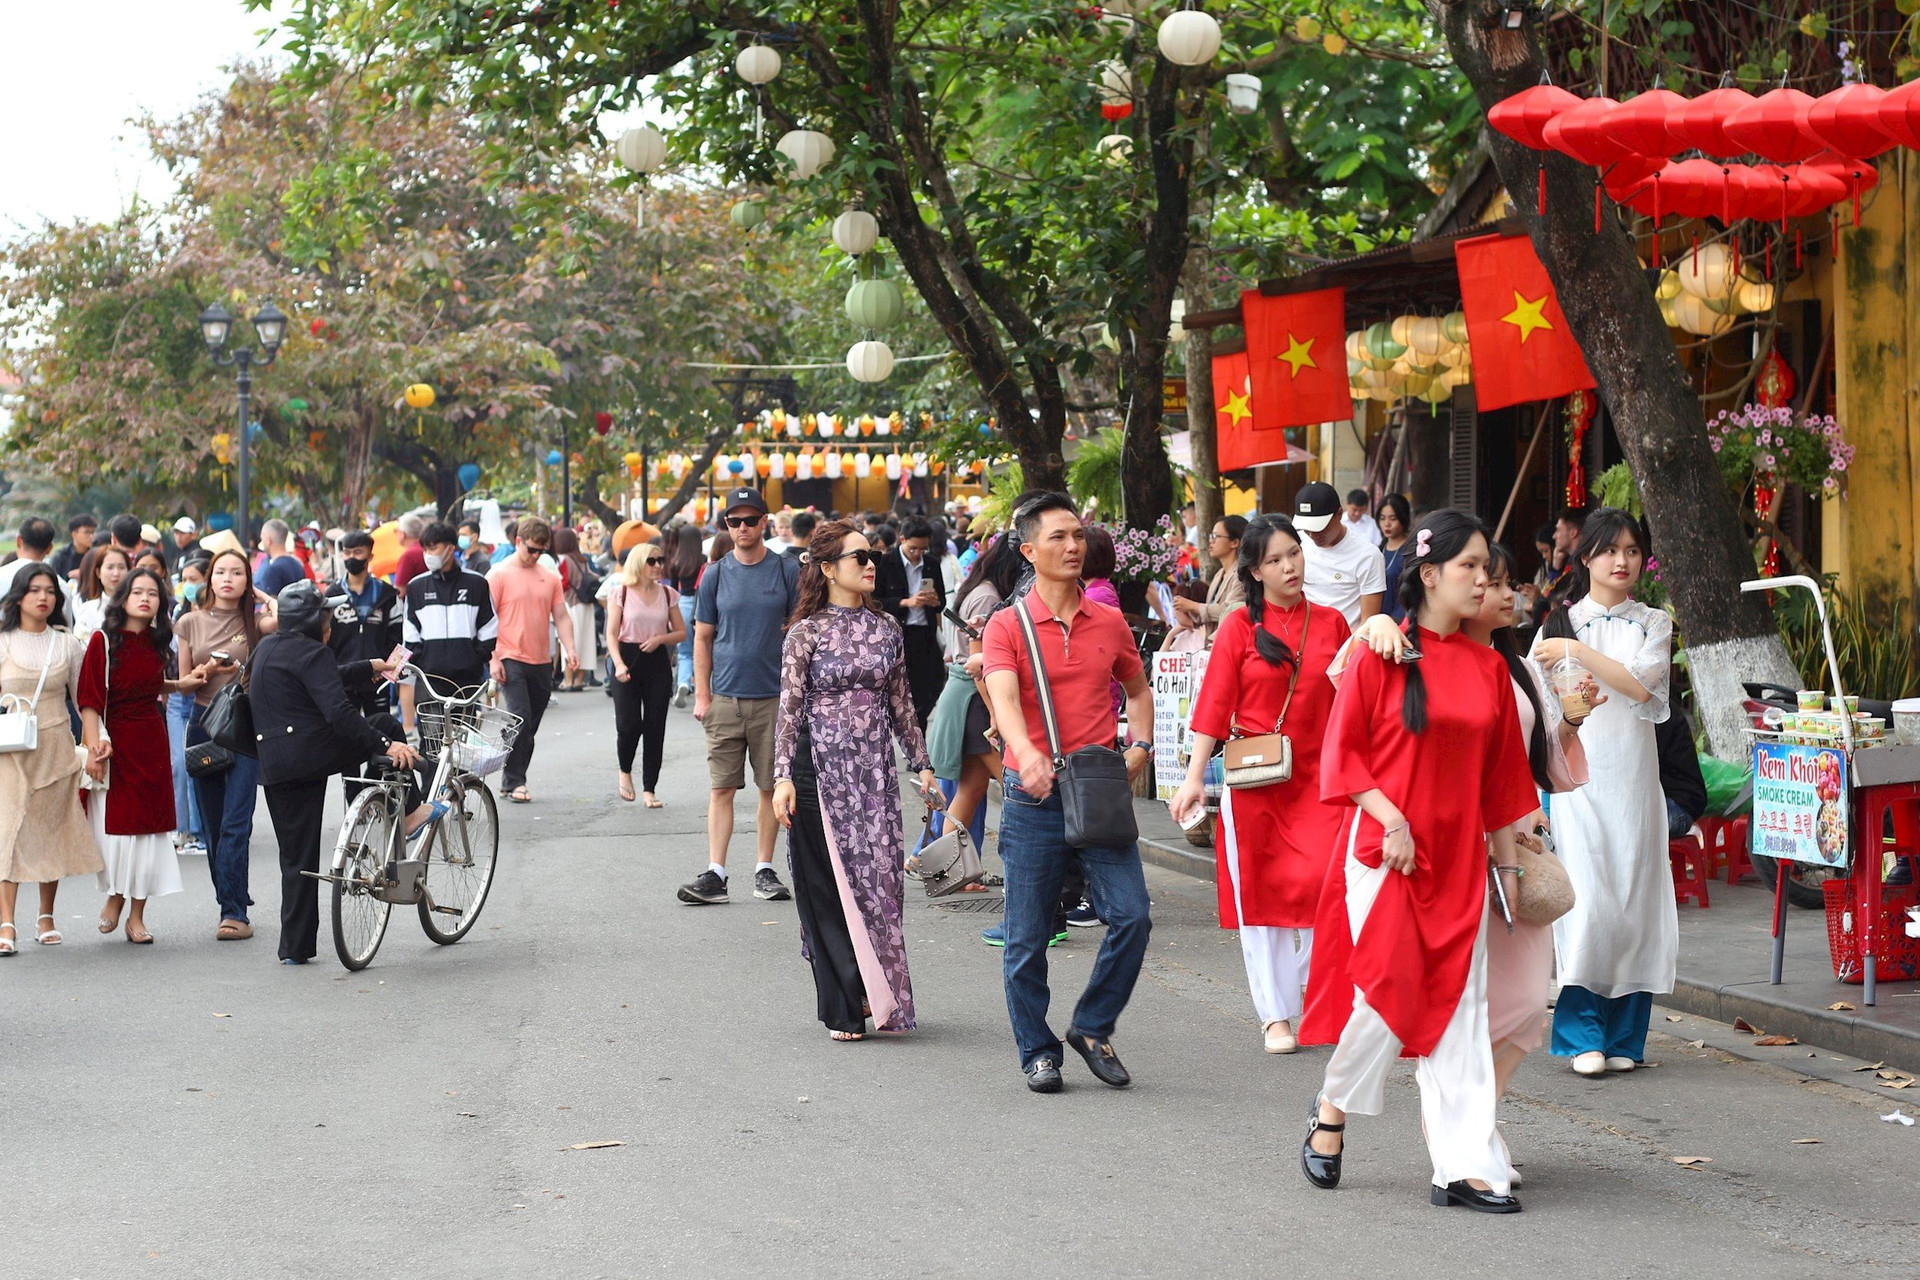 International tourists to Quang Nam increased sharply during Tet holiday